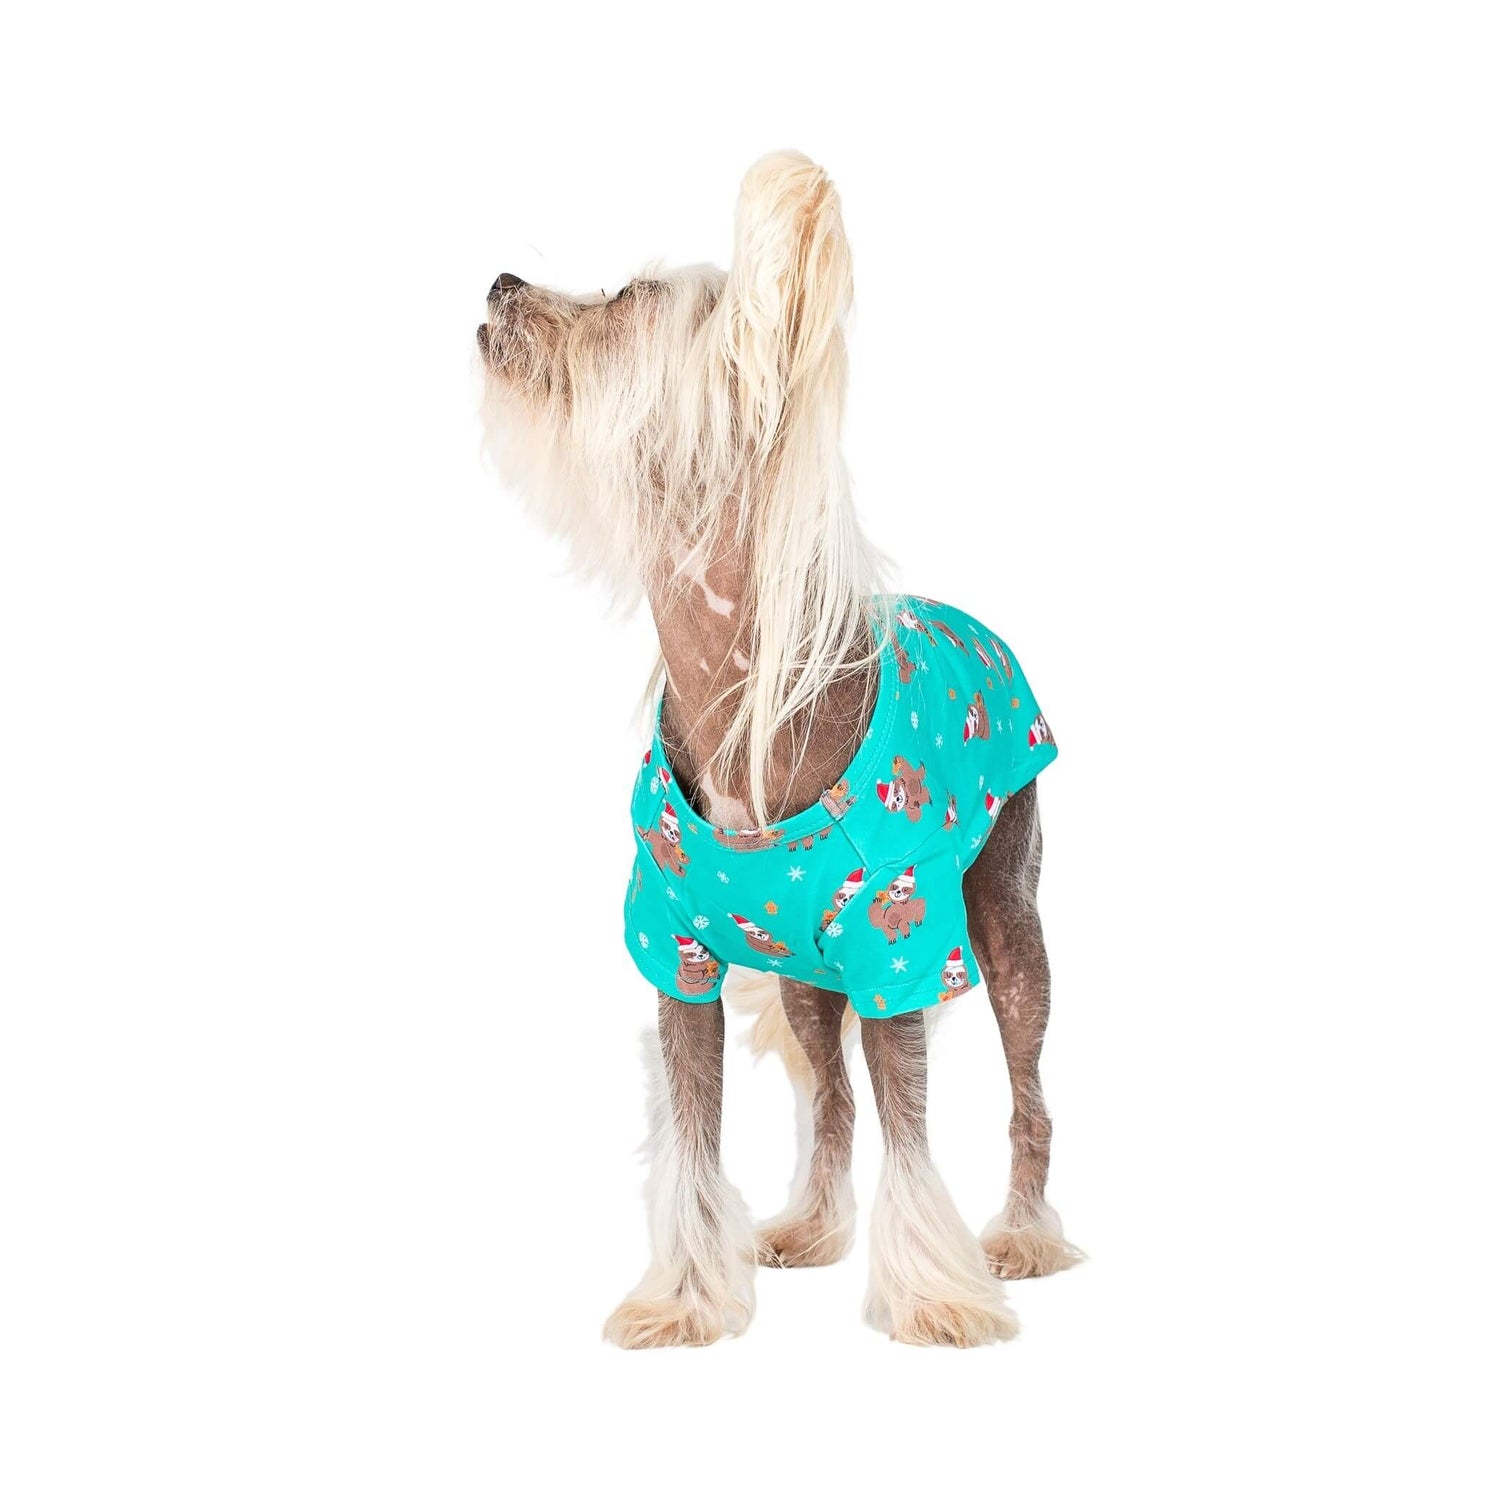 Adorable Chinese Crested in Festive Sloths Dog Shirt - Charming Chinese Crested Dog Wearing a Green Christmas Shirt with Sloths in Santa Hats - Enhance Your Chinese Crested's Holiday Look with Fashionable Dog Clothing - Shop Now for Dog Shirts and Dog Clothing for Your Precious Chinese Crested Companion.